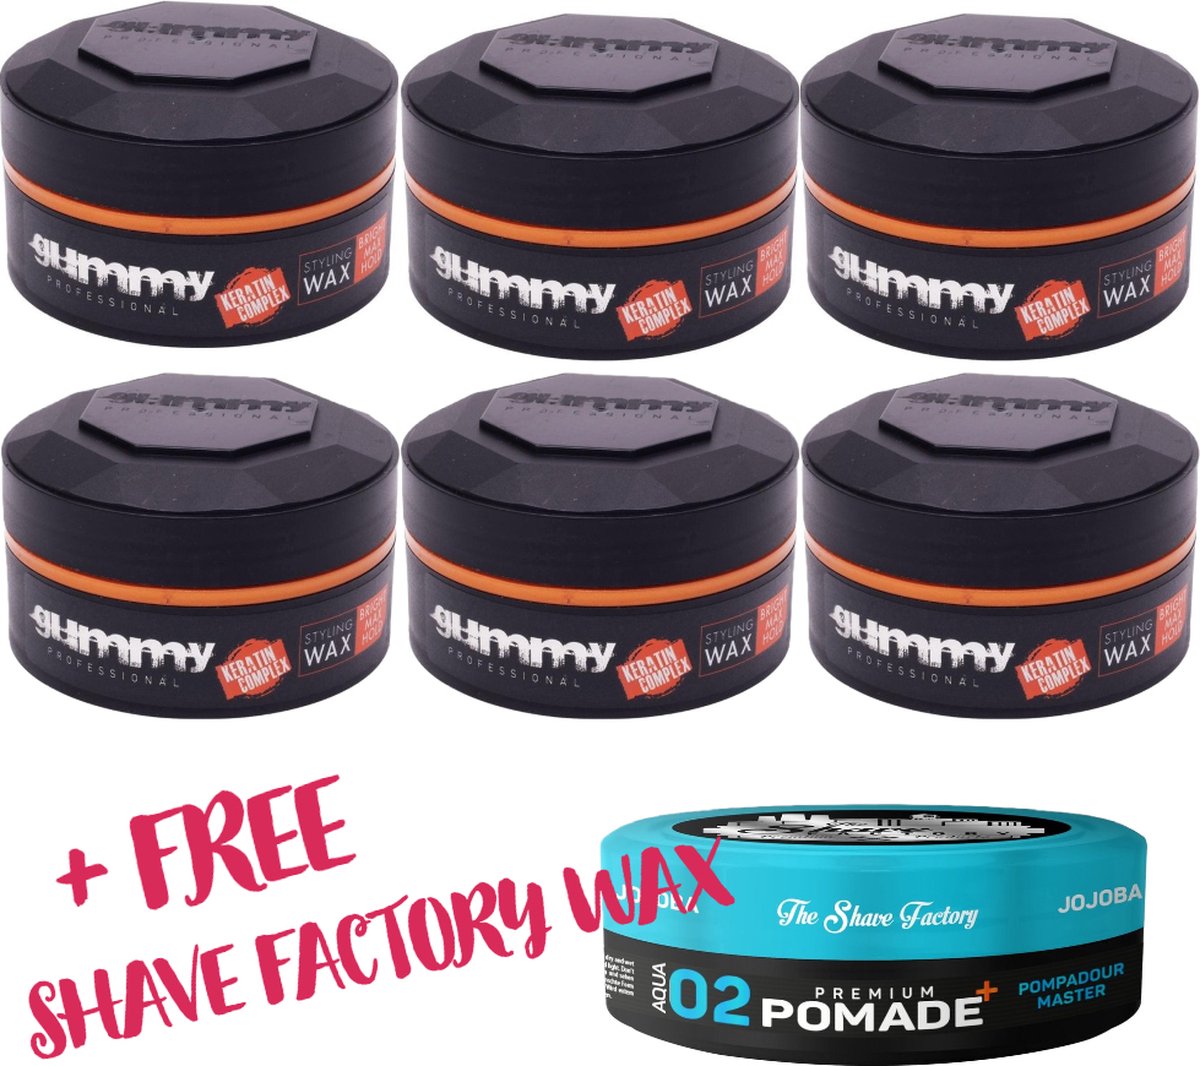 GUMMY WAX BRIGHT FINISH 6-PACK + FREE SHAVE FACTORY WAX | GUMMY POMADE | FONEX BRIGHT FINISH WAX